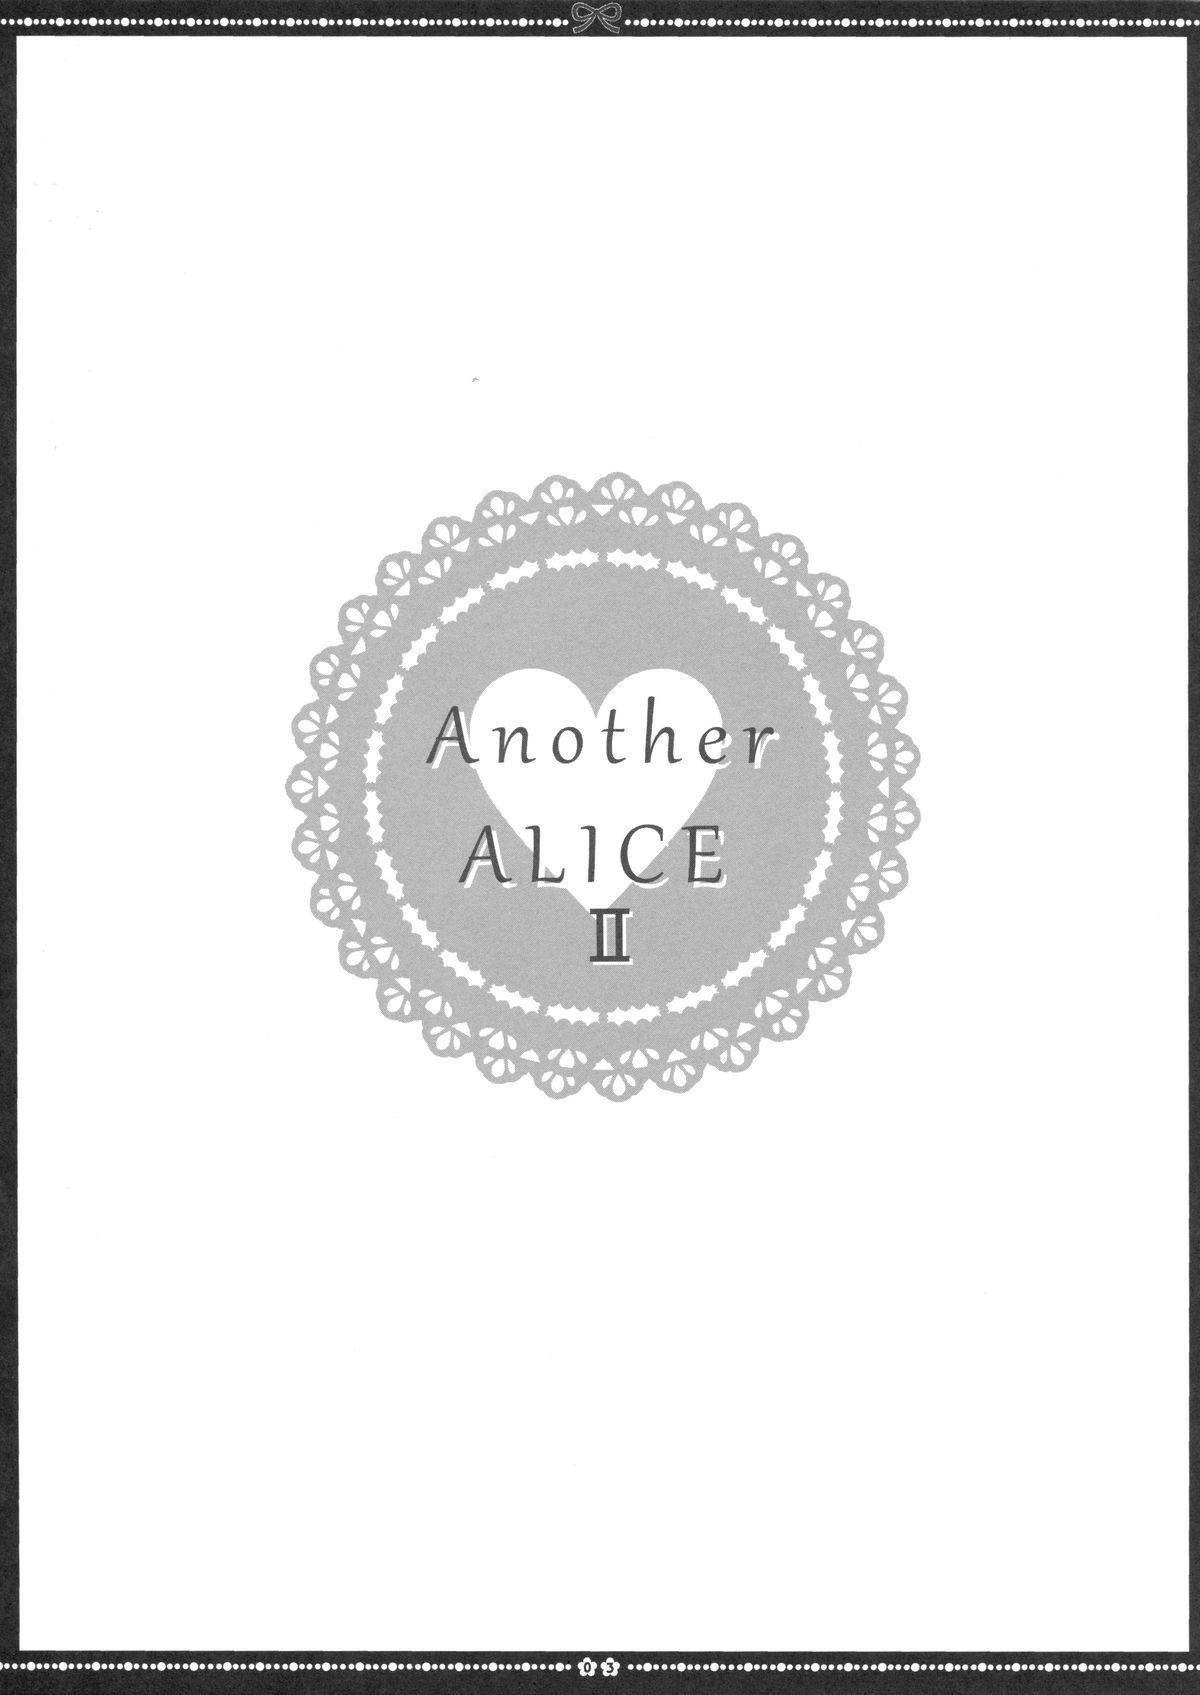 Another ALICE 2 1